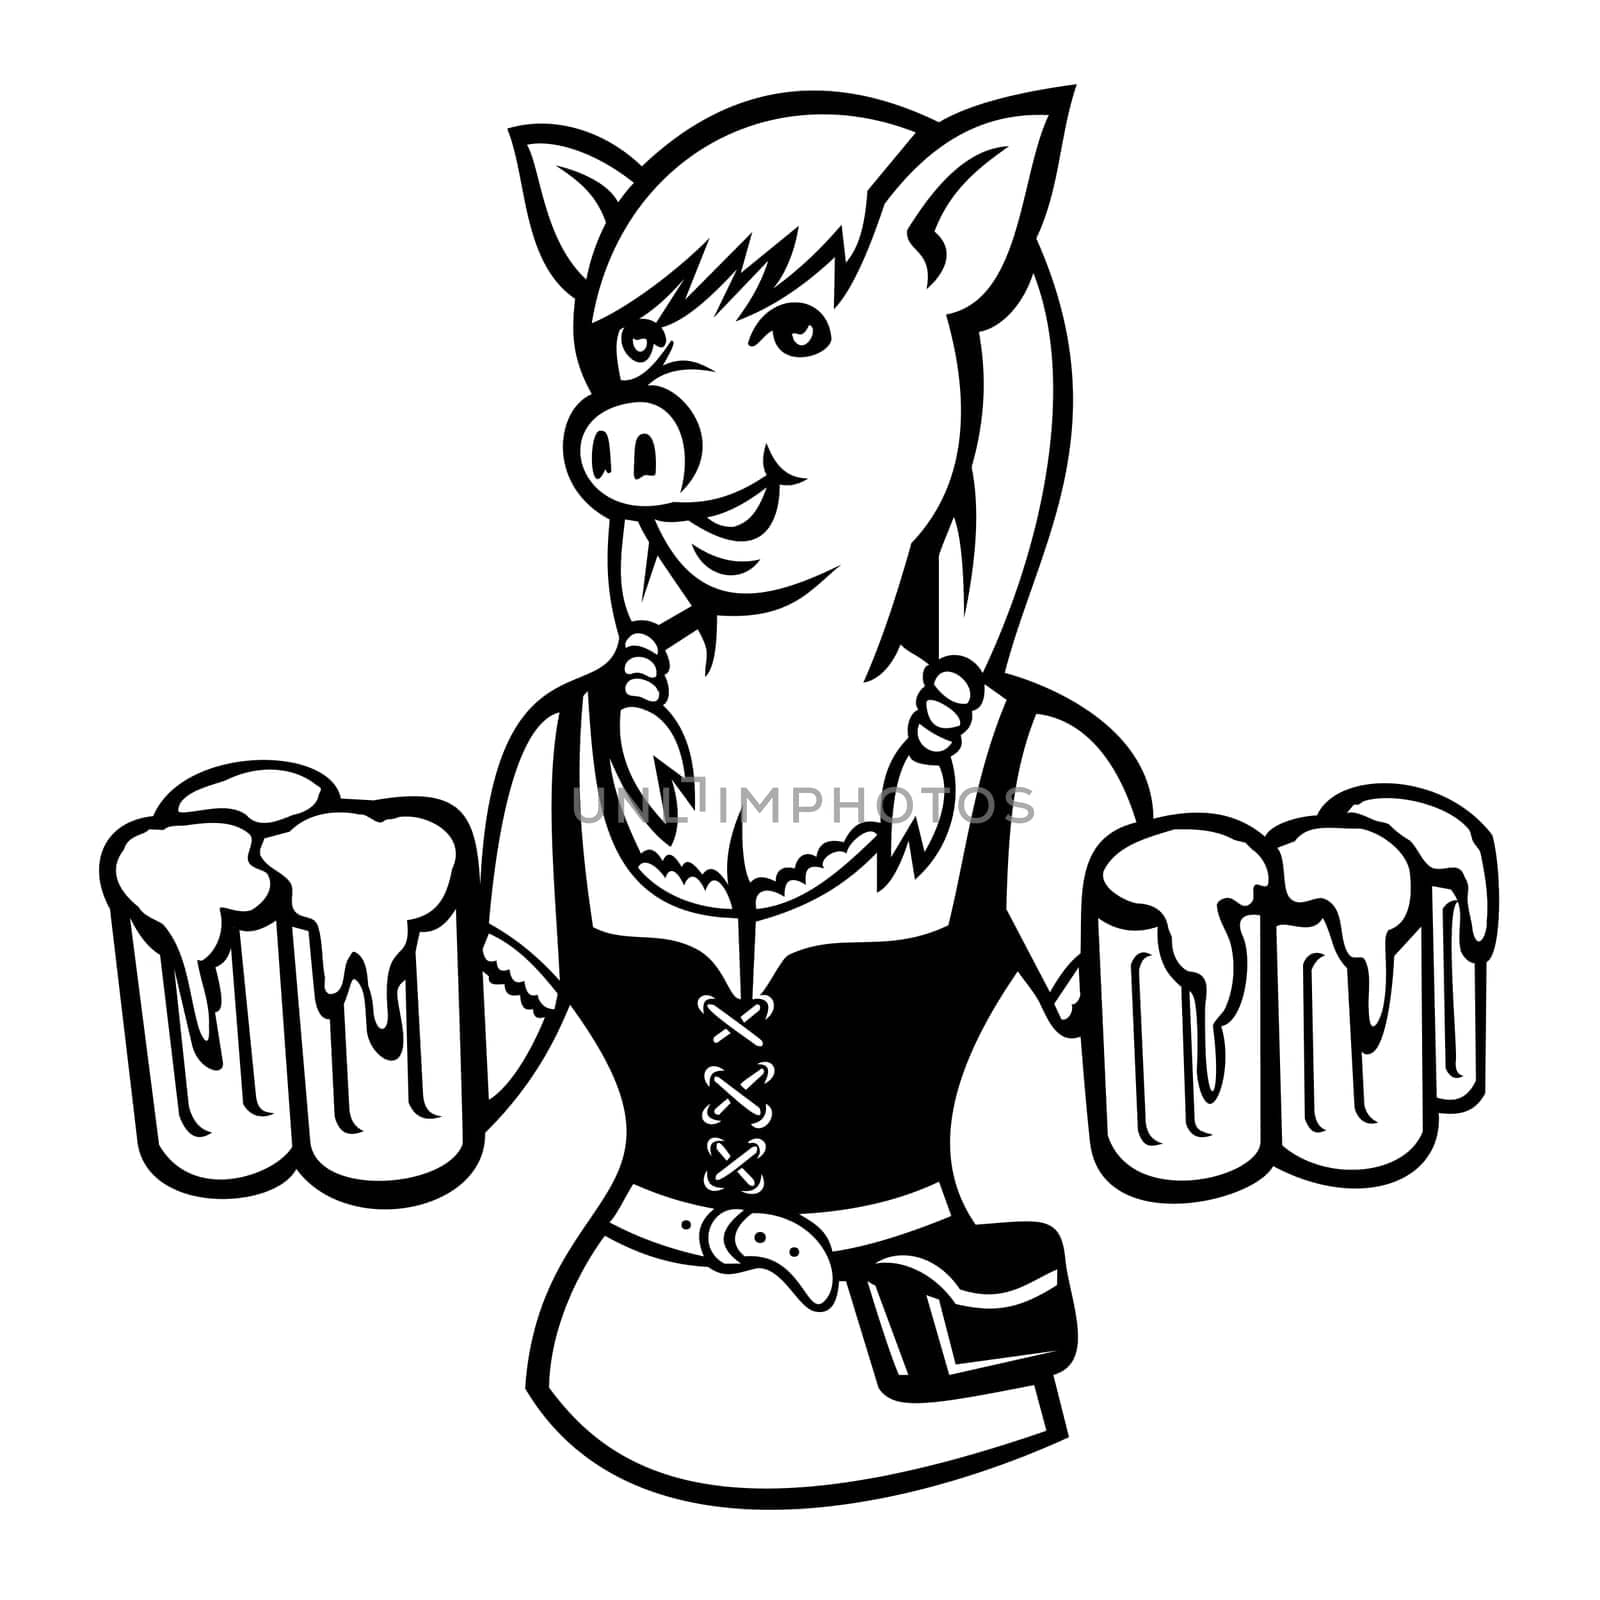 Mascot illustration of lady pig Oktoberfest waitress, beer maid or beer waitress wearing a dirndl serving six mugs of beer viewed from front on isolated background in retro style.
